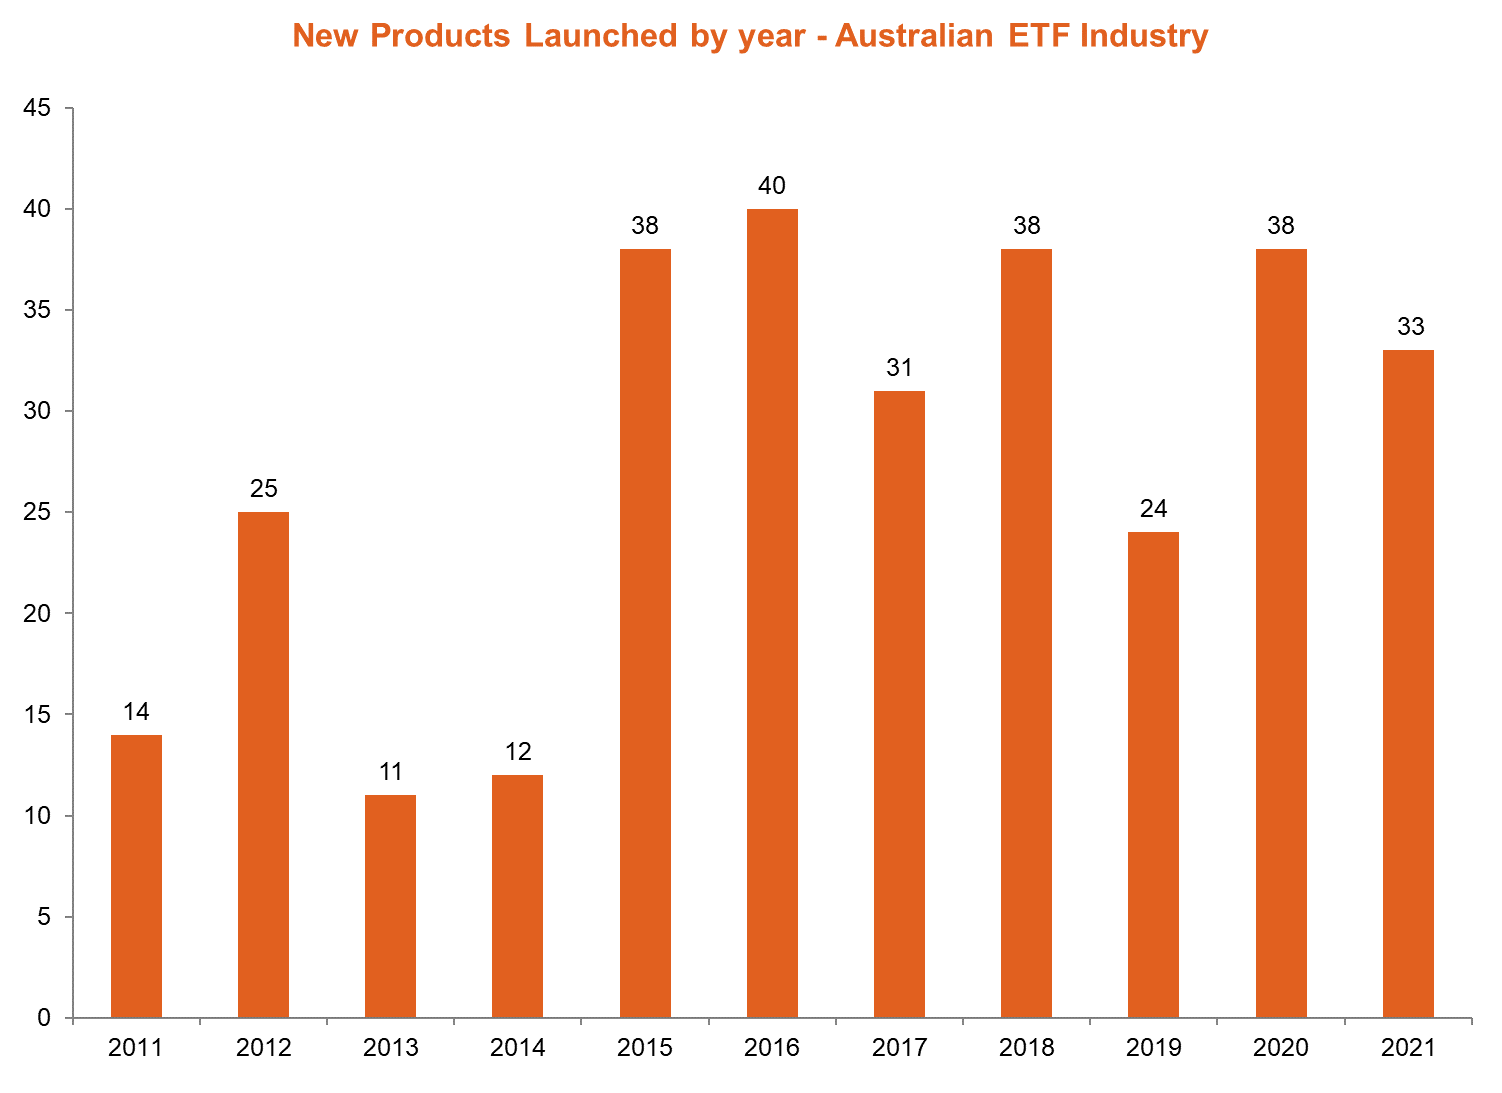 Australian ETF Industry - New Products 2021